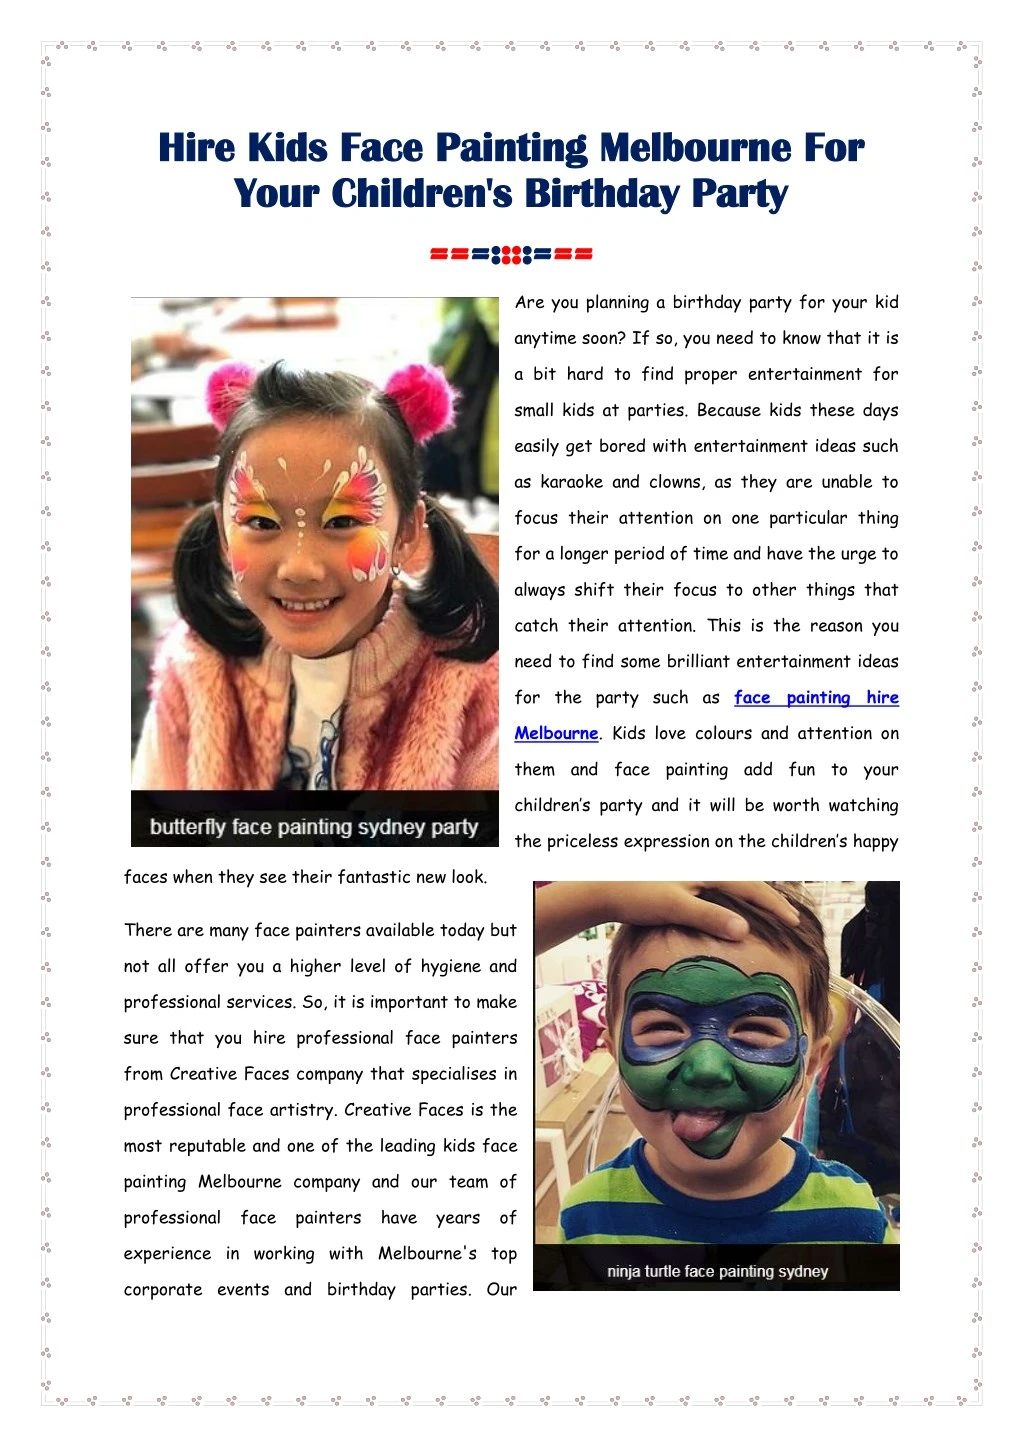 hire kids face painting melbourne for hire kids